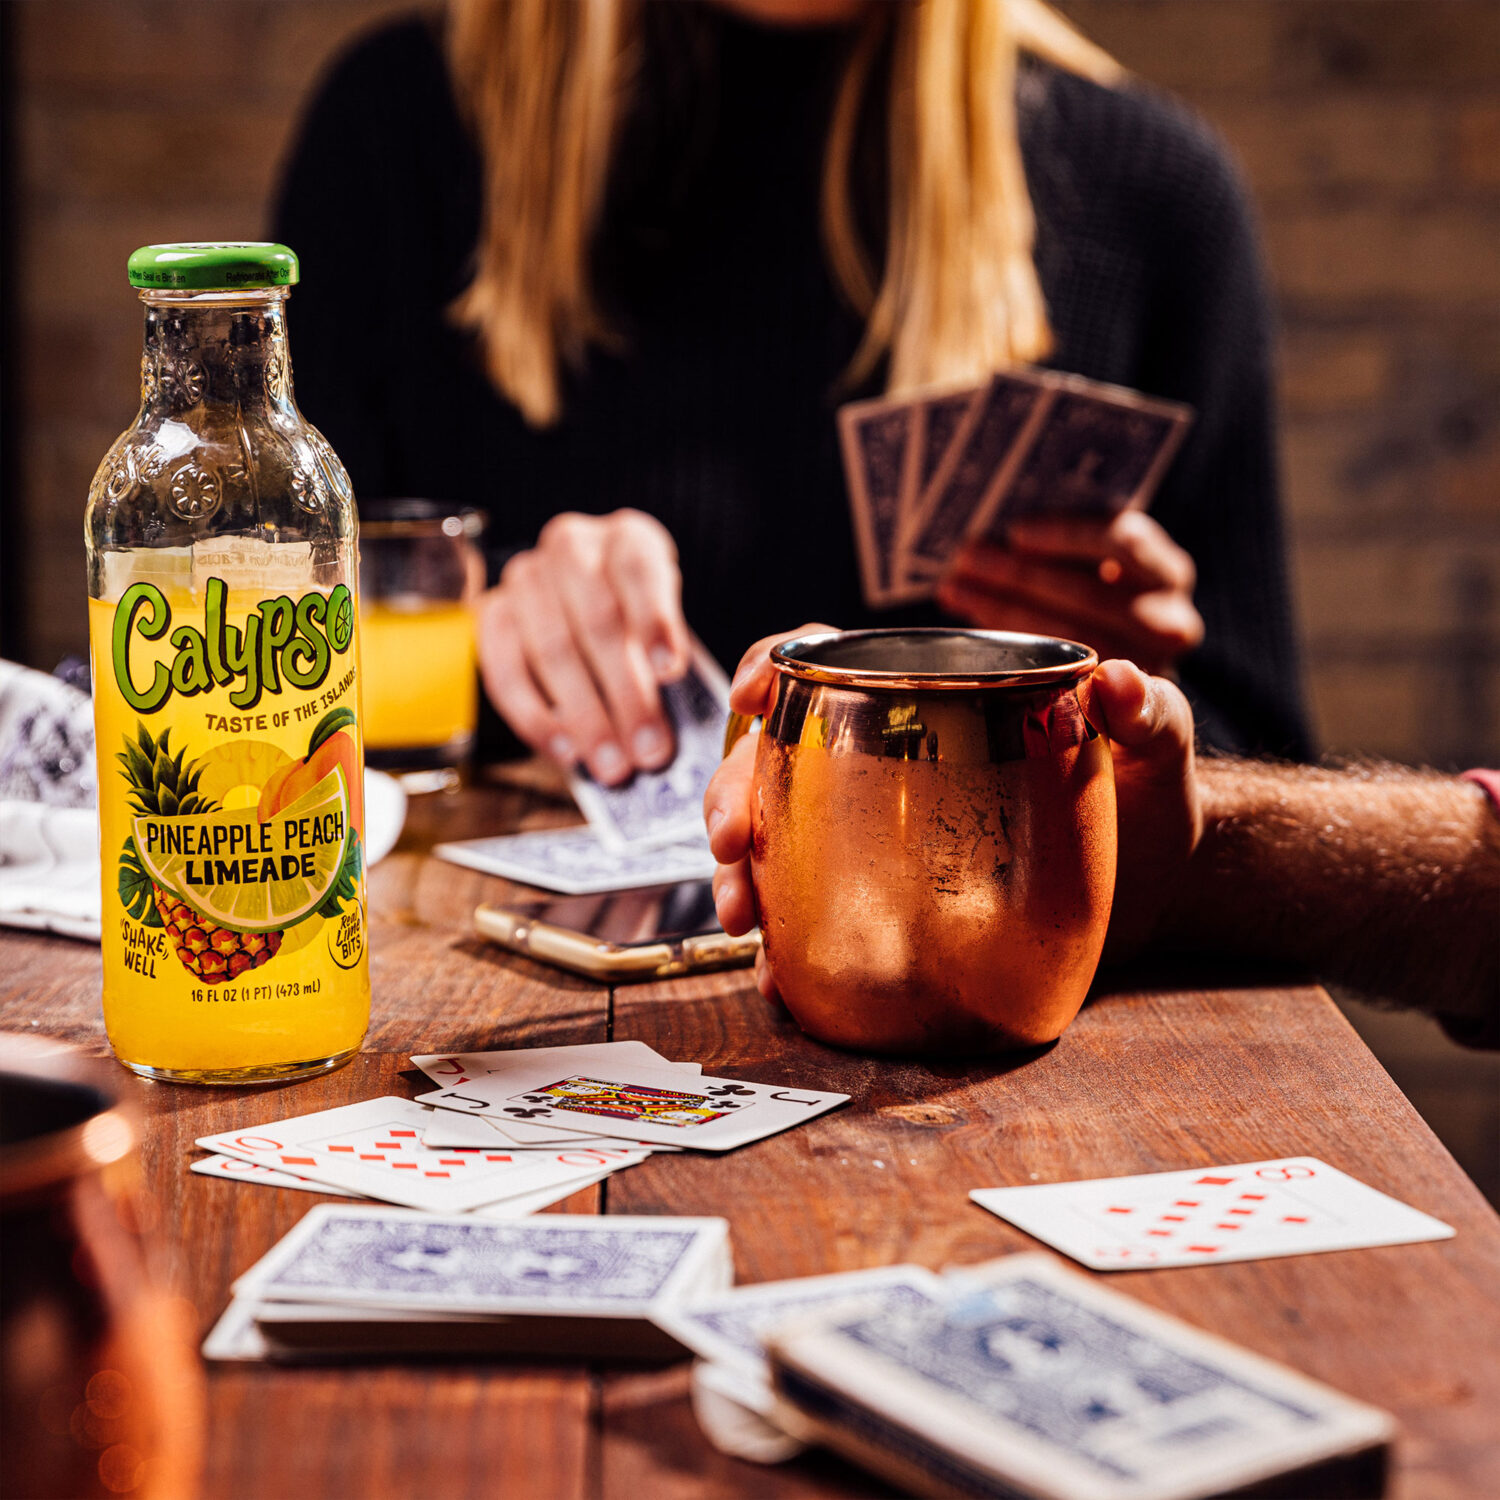 A group of people playing cards at a table while drinking a Calypso Pineapple Peach Limeade cocktail.